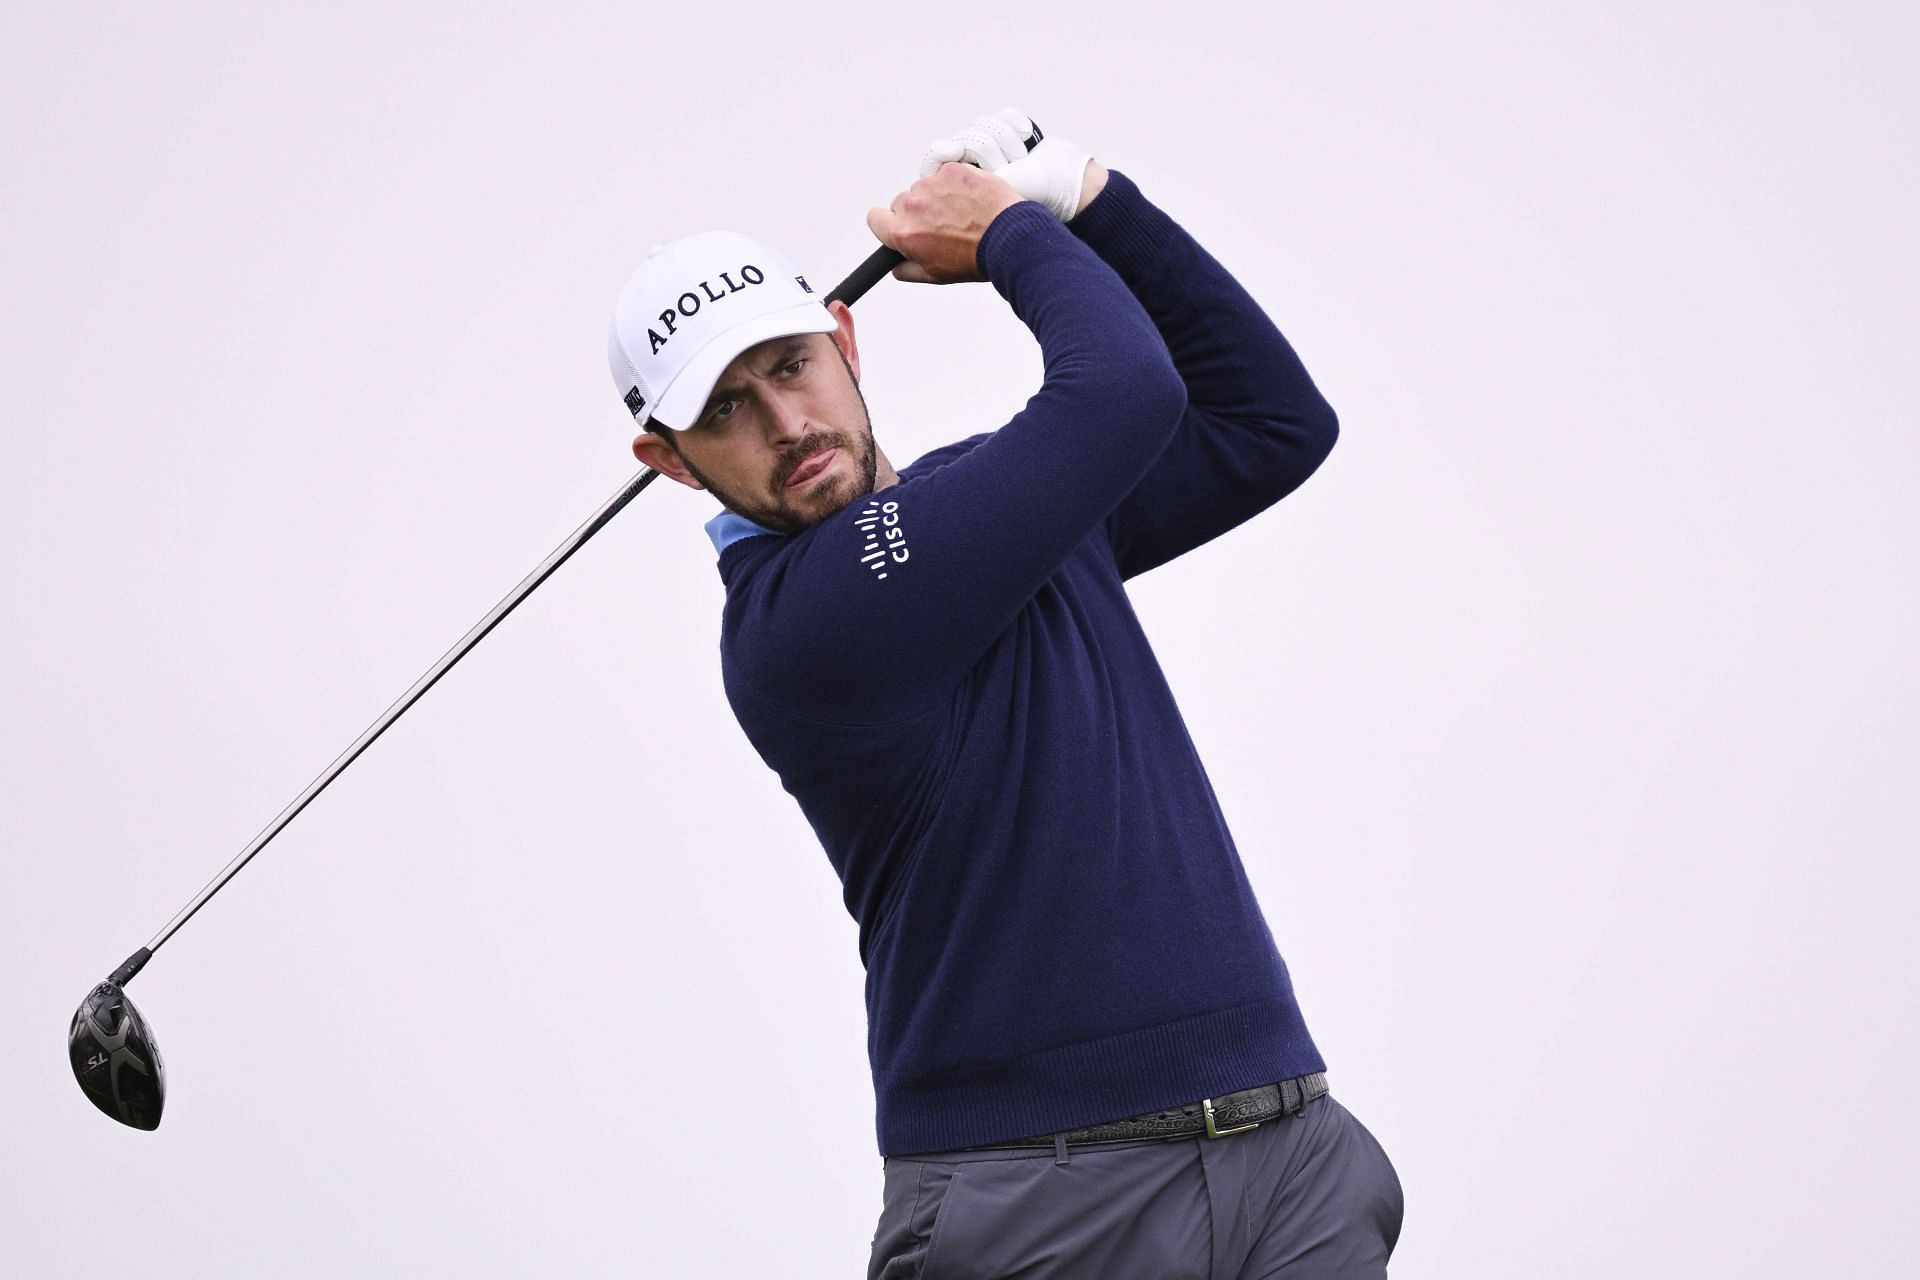 Patrick Cantlay is up for the Farmers Insurance Open lead